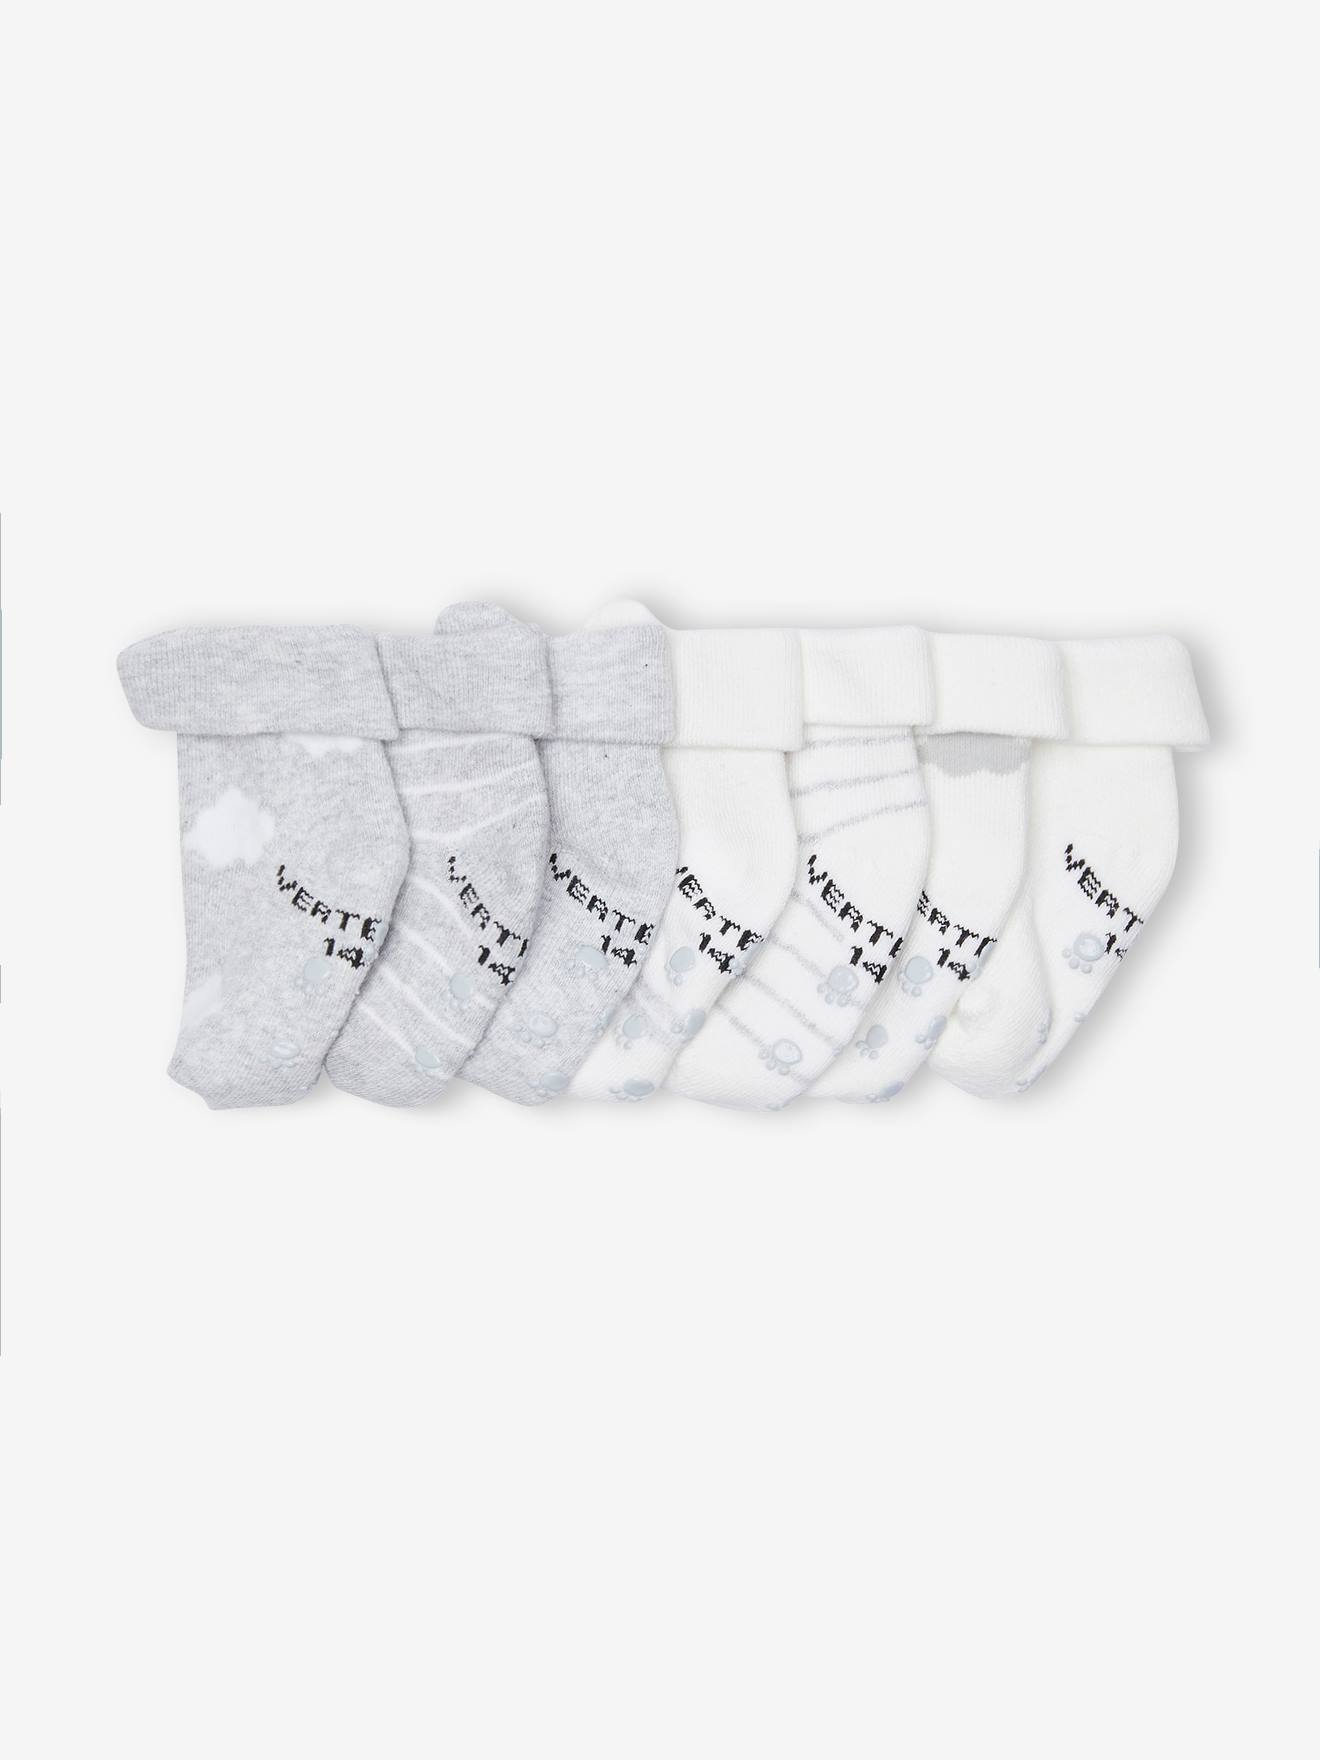 Pack of 7 Pairs of "Clouds & Bears" Socks for Babies marl grey